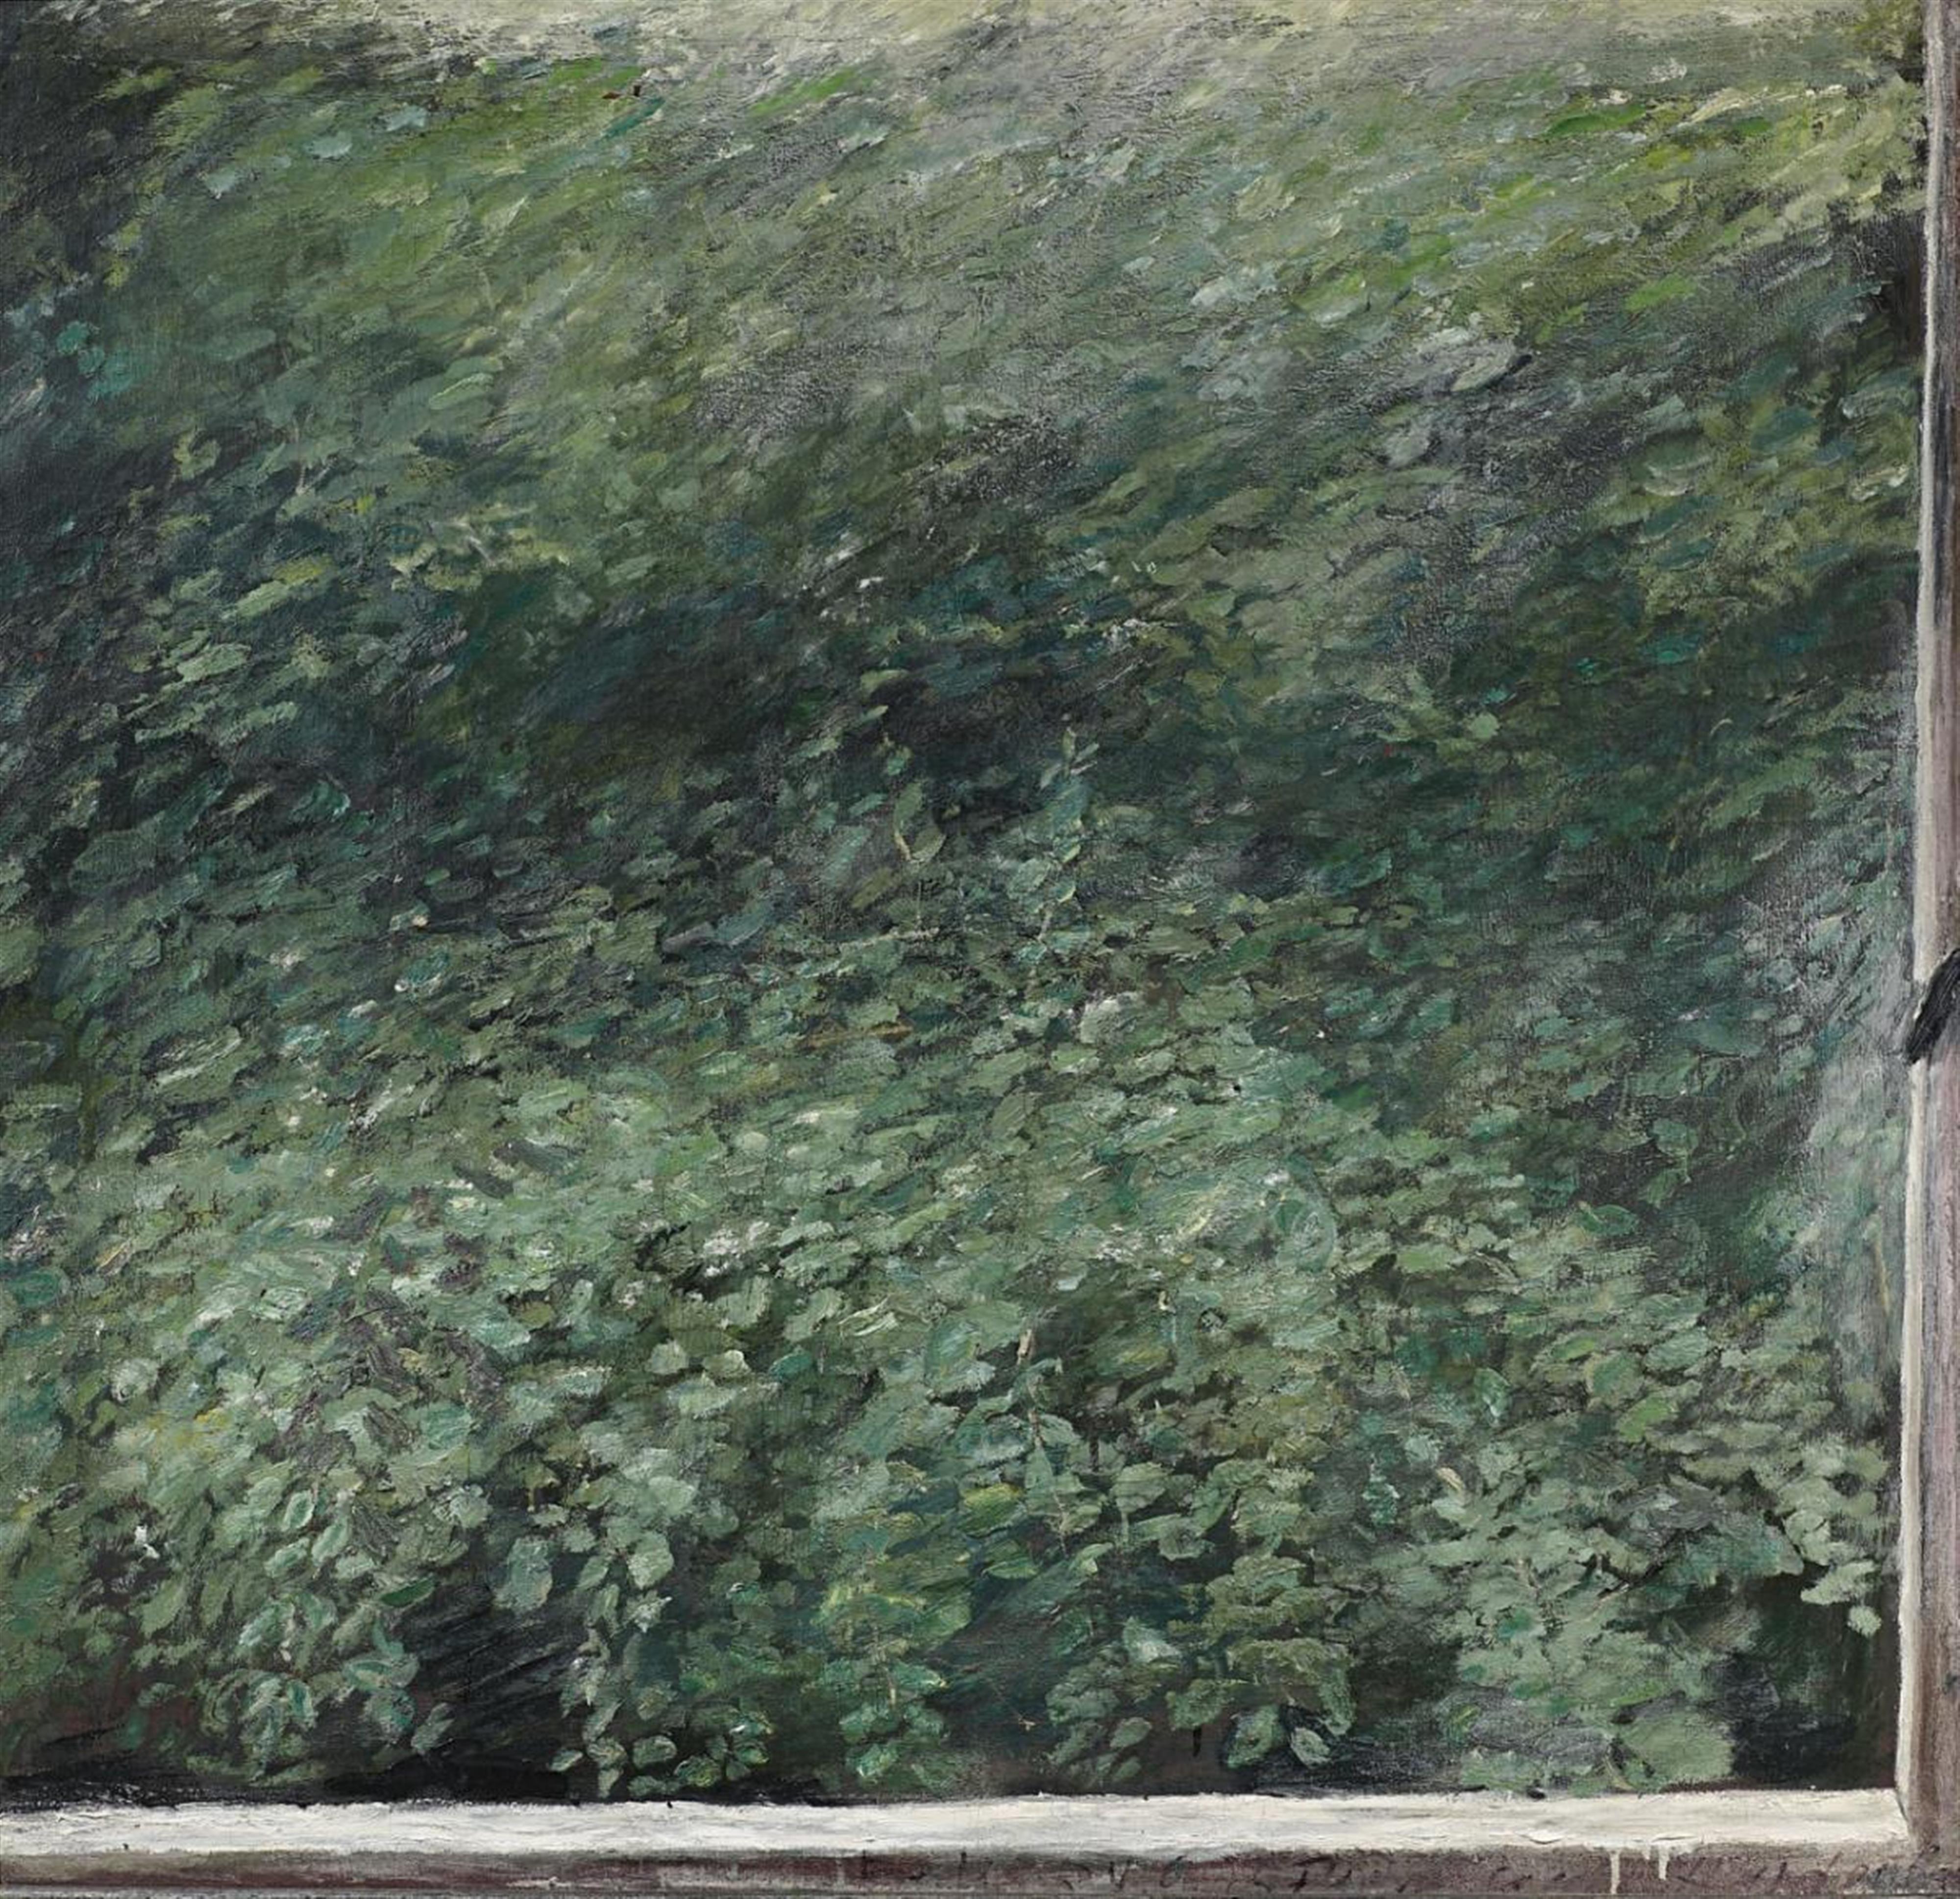 Klaus Fußmann - Untitled (View from a Berlin Window onto Green) - image-1